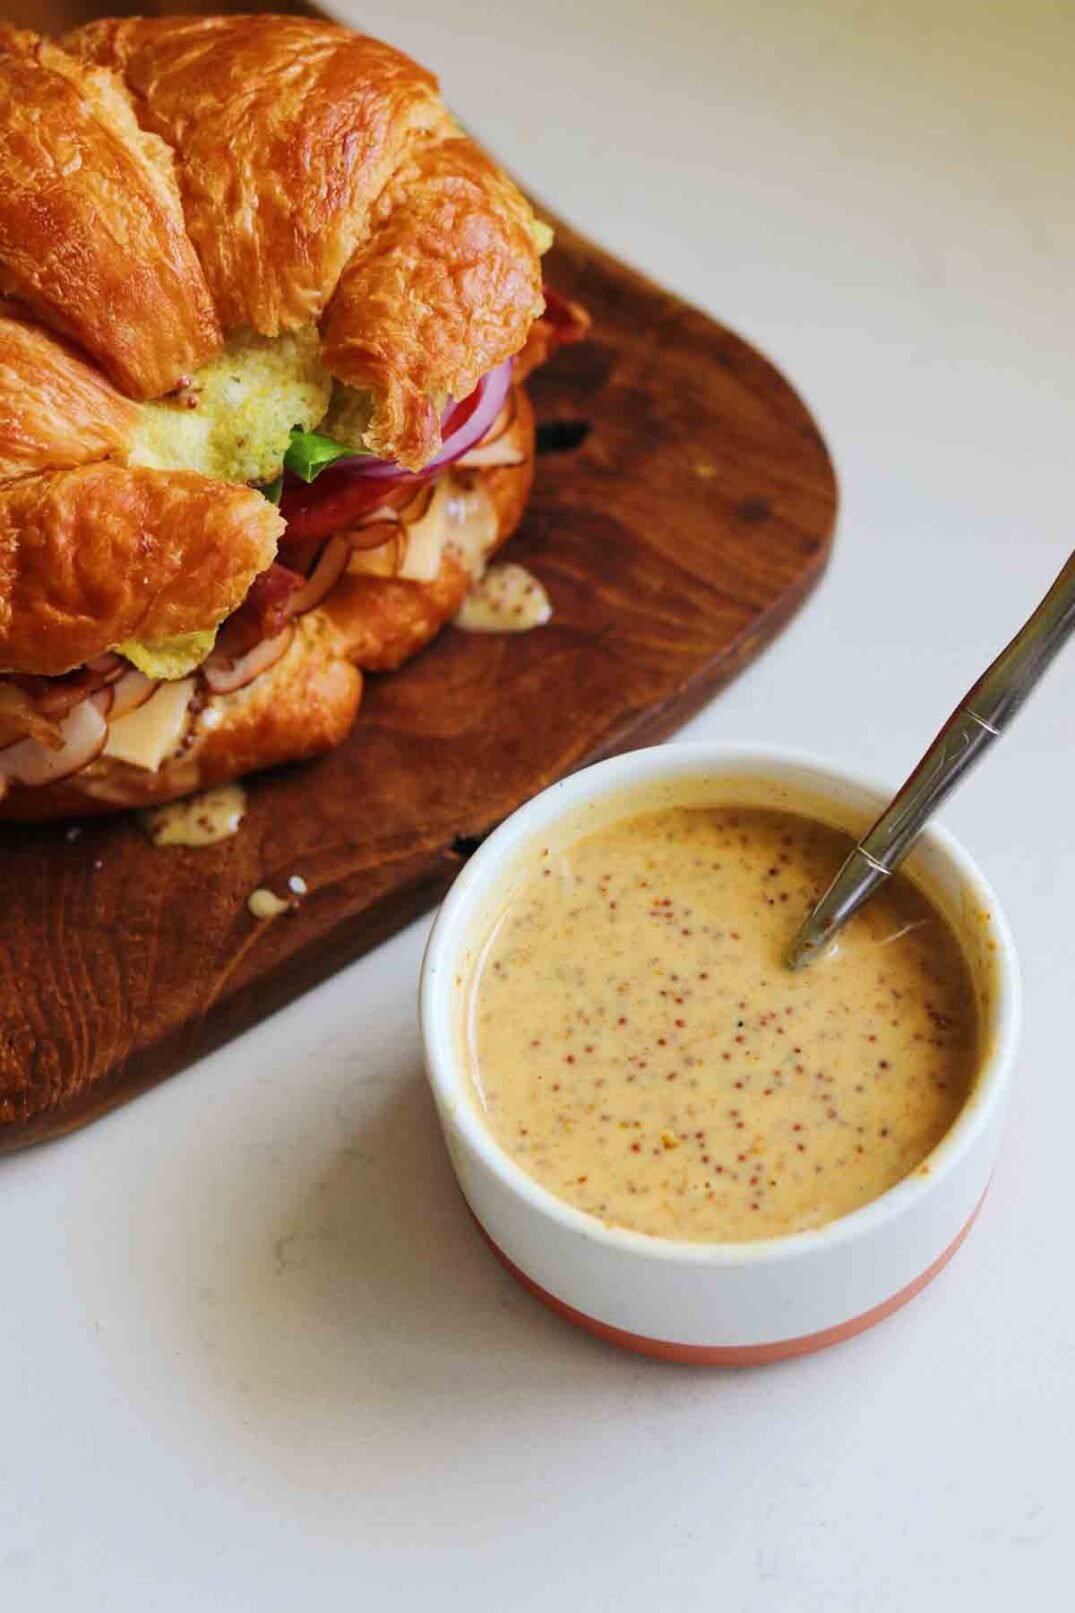 a turkey croissant sandwich with a small bowl of grainy honey mustard.